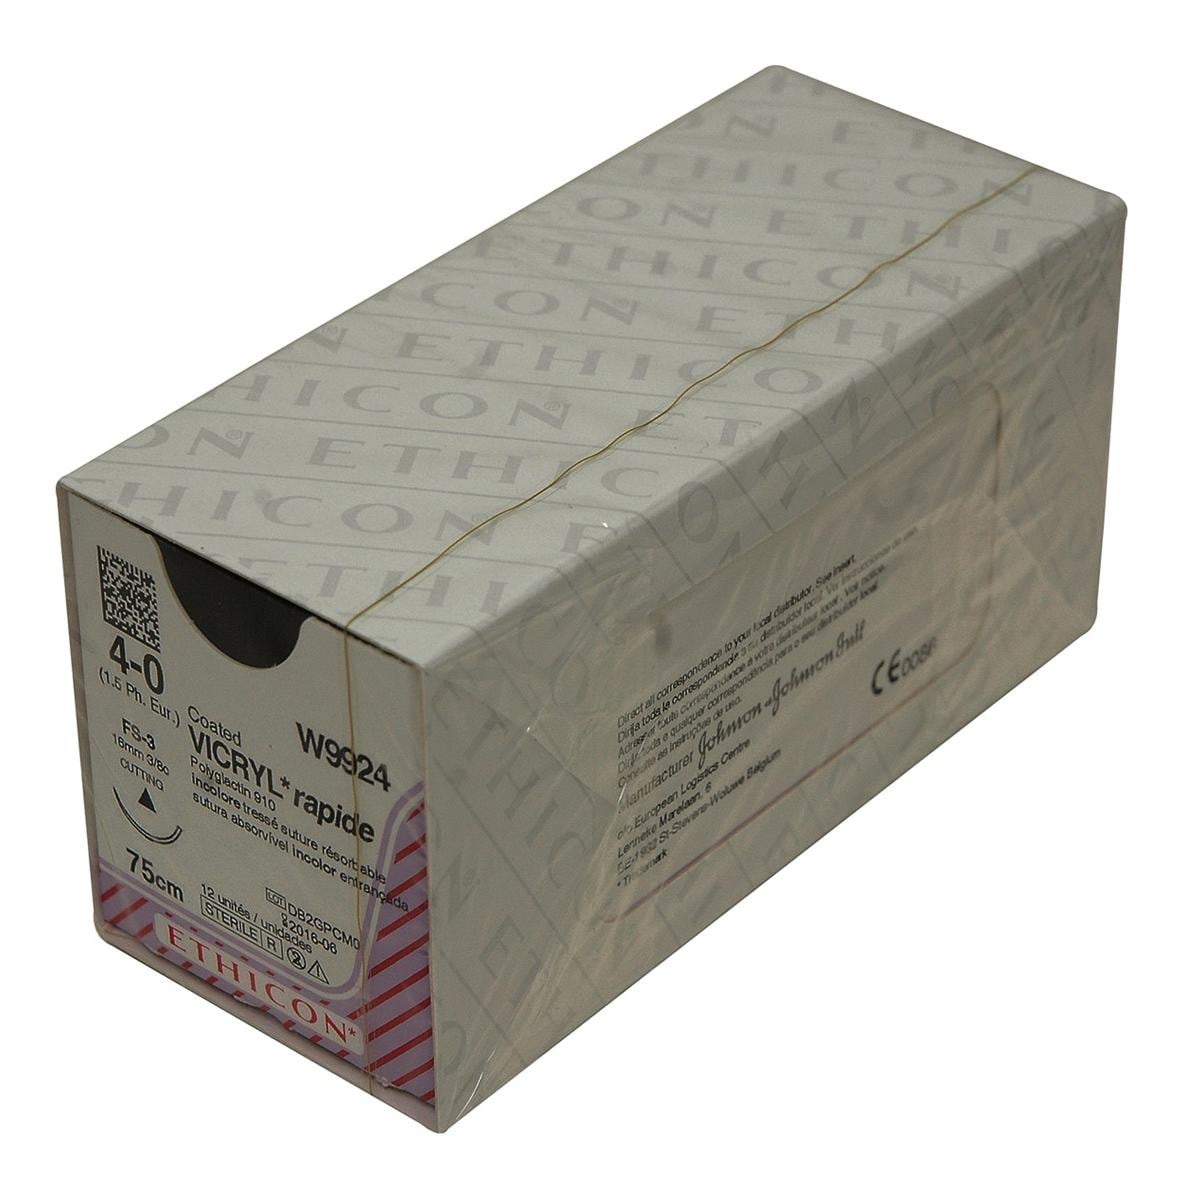 Vicryl Rapide Suture Undyed Coated 75cm 4-0 3/8 Circle Conventional Cutting FS-3 16mm 12pk